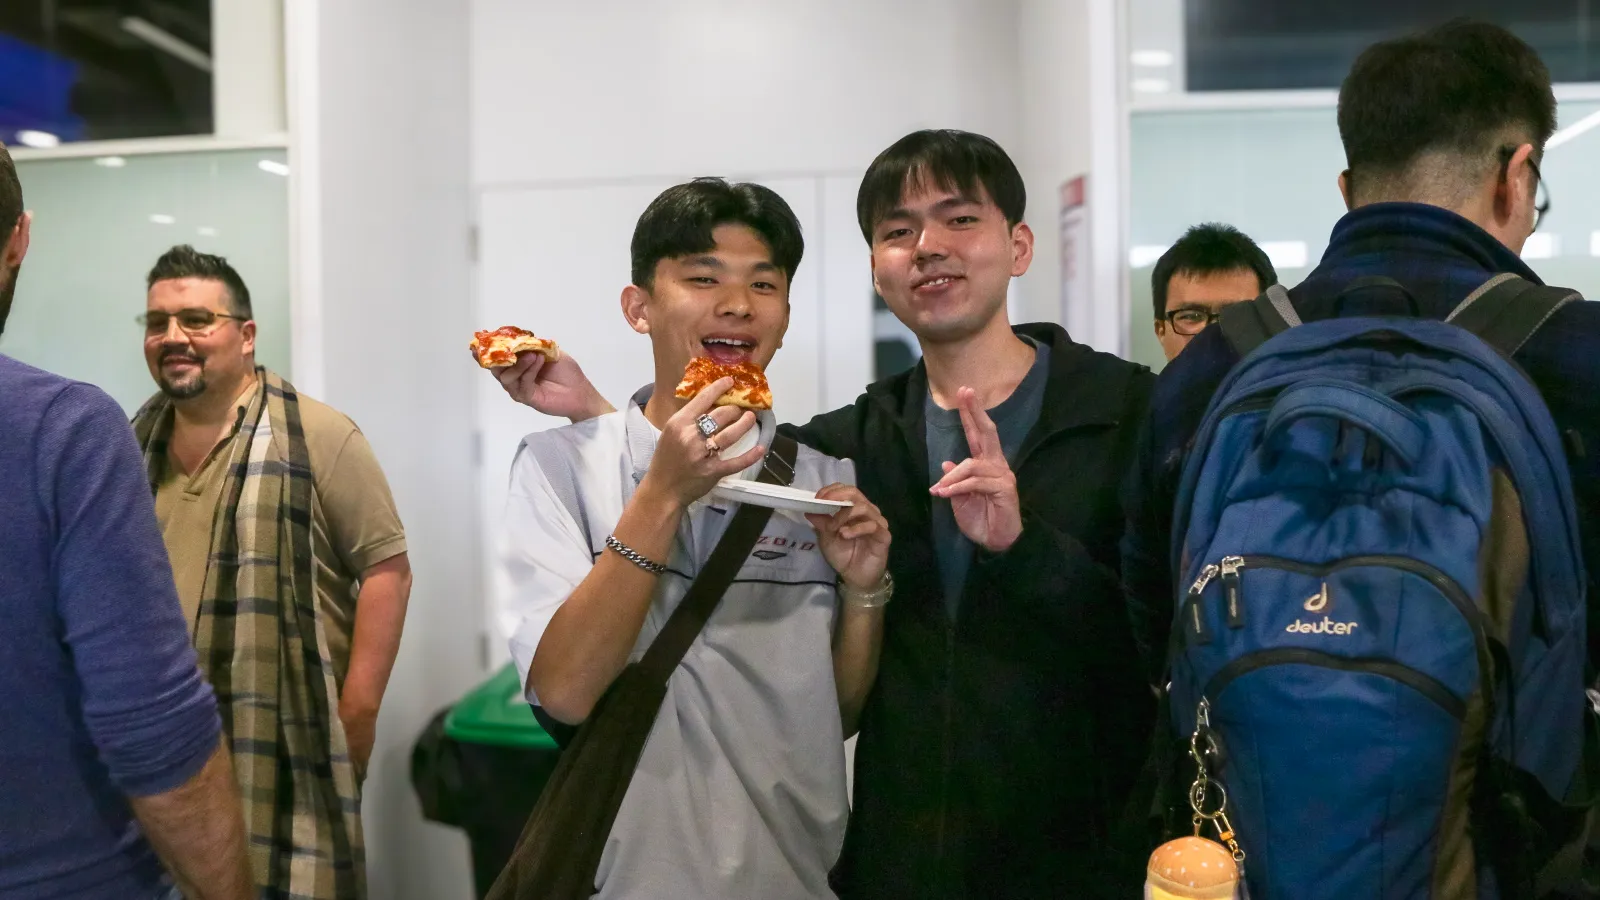 Two Singapore students show the pizza they are having while meeting Europe campus